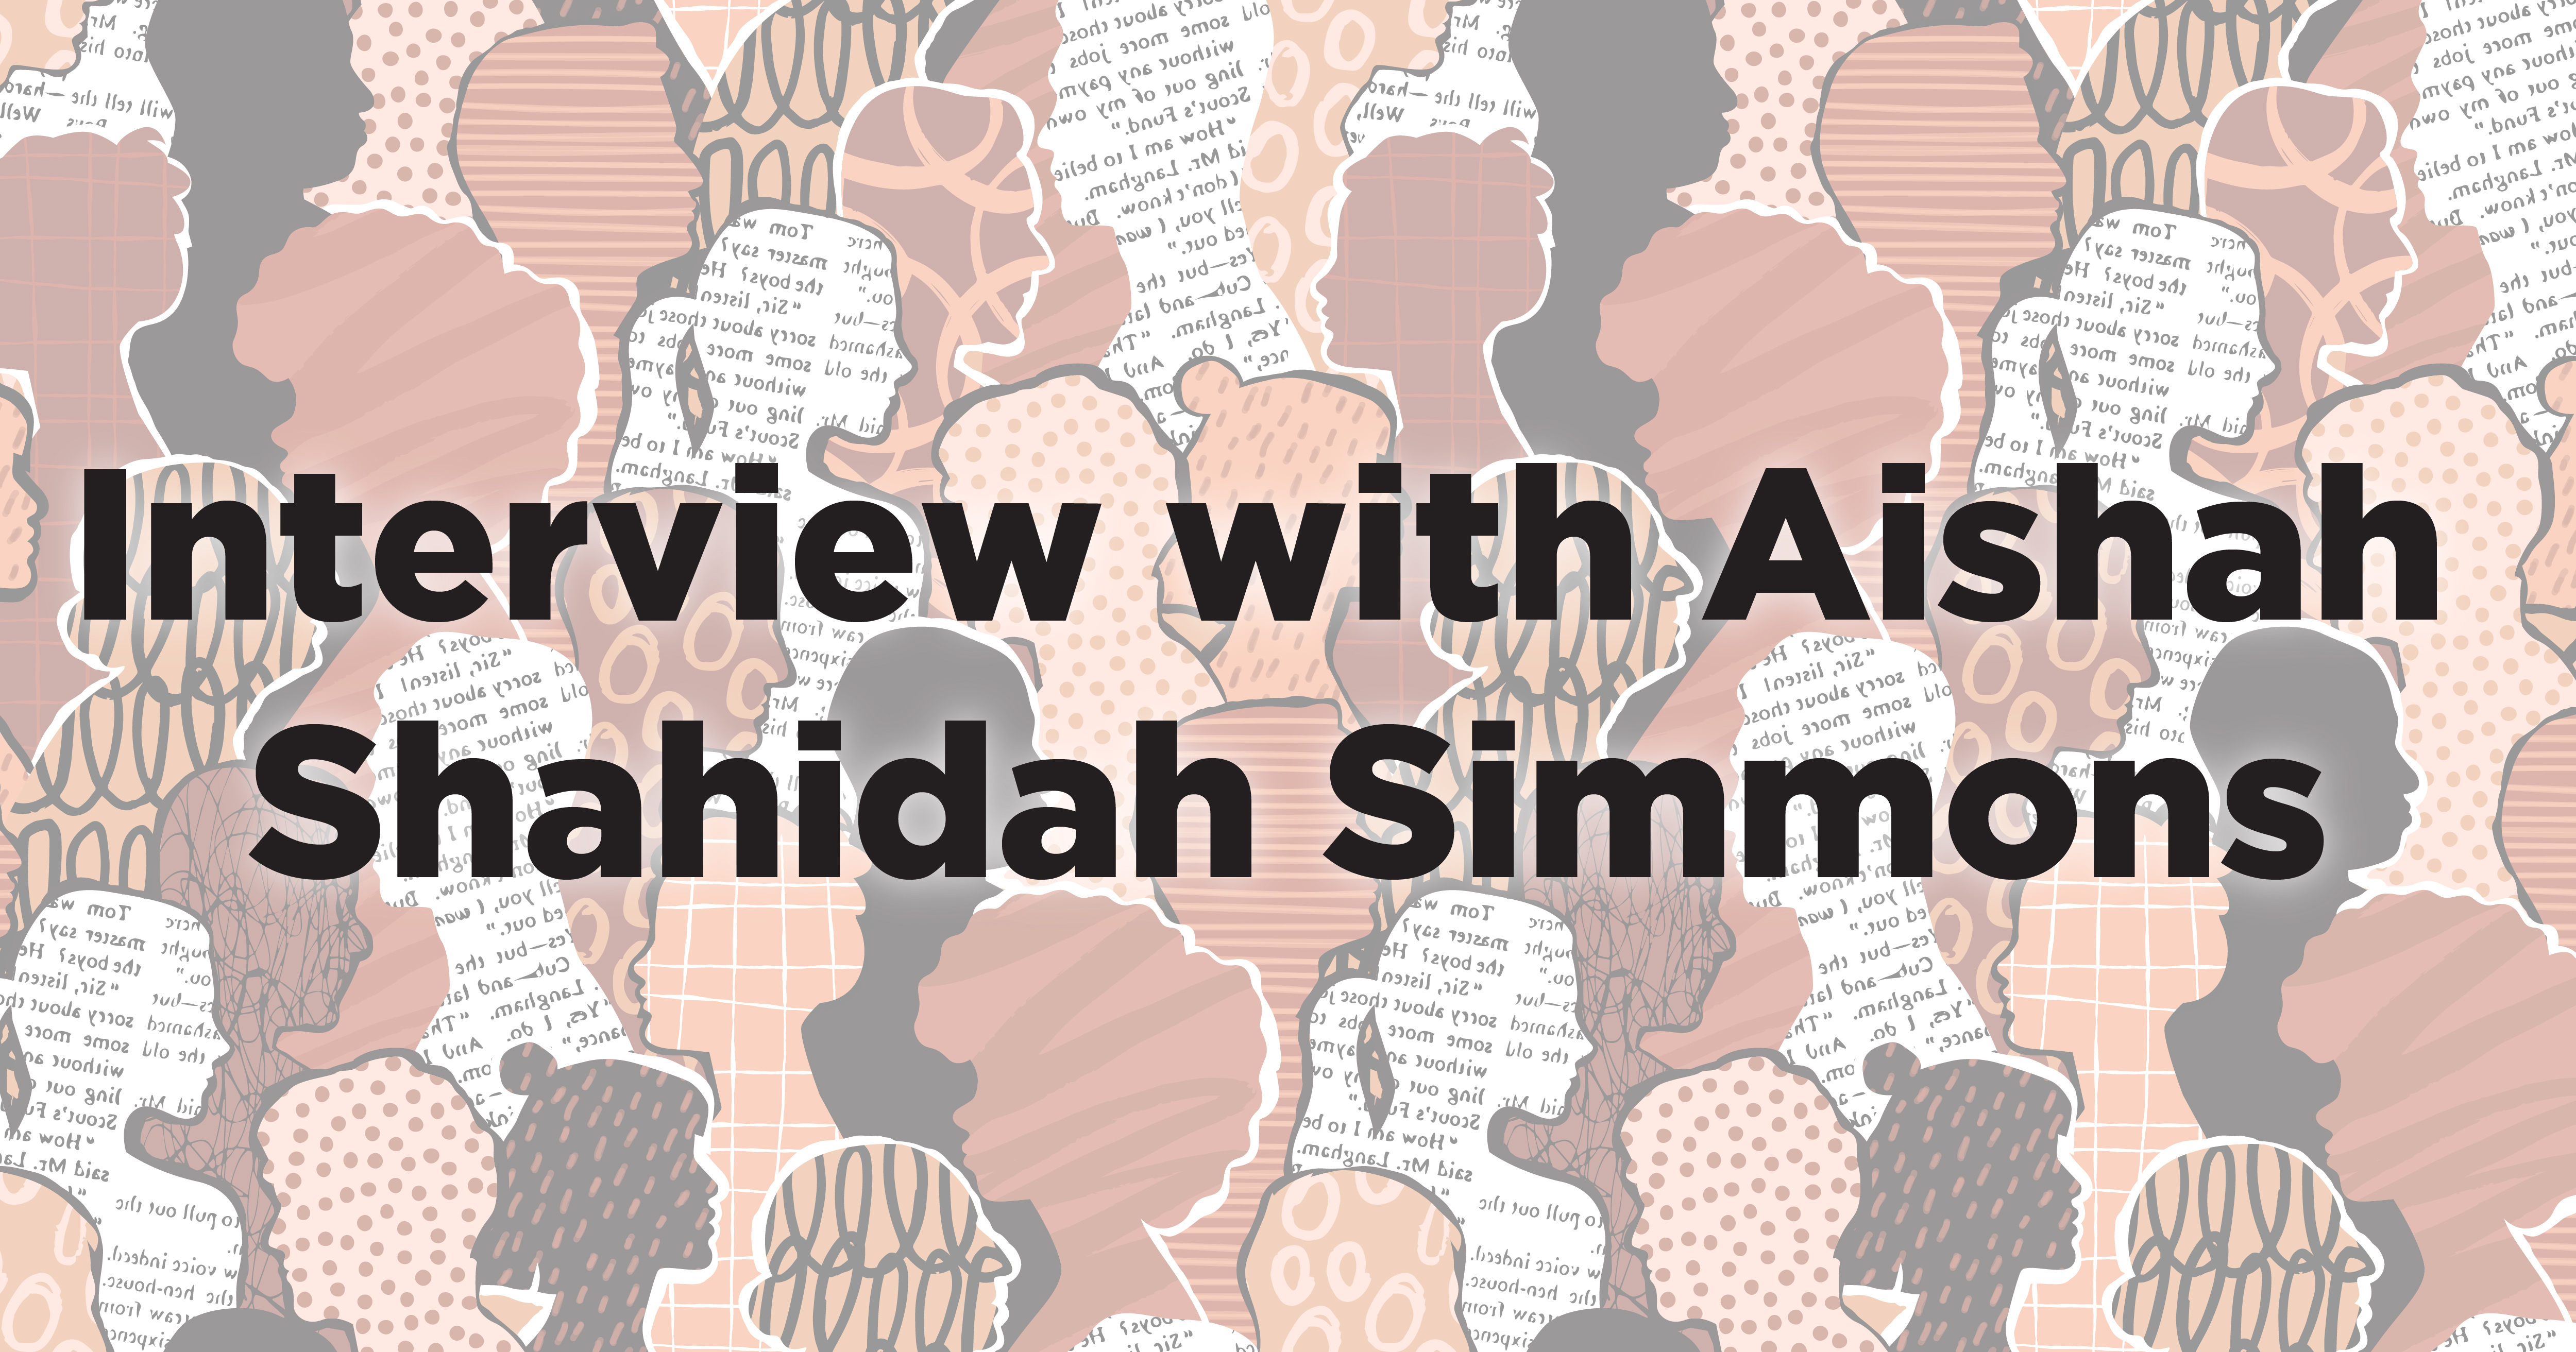 Multi-colored silhouettes of heads, with black print on top that reads "Interview with Aishah Shahidah Simmons"